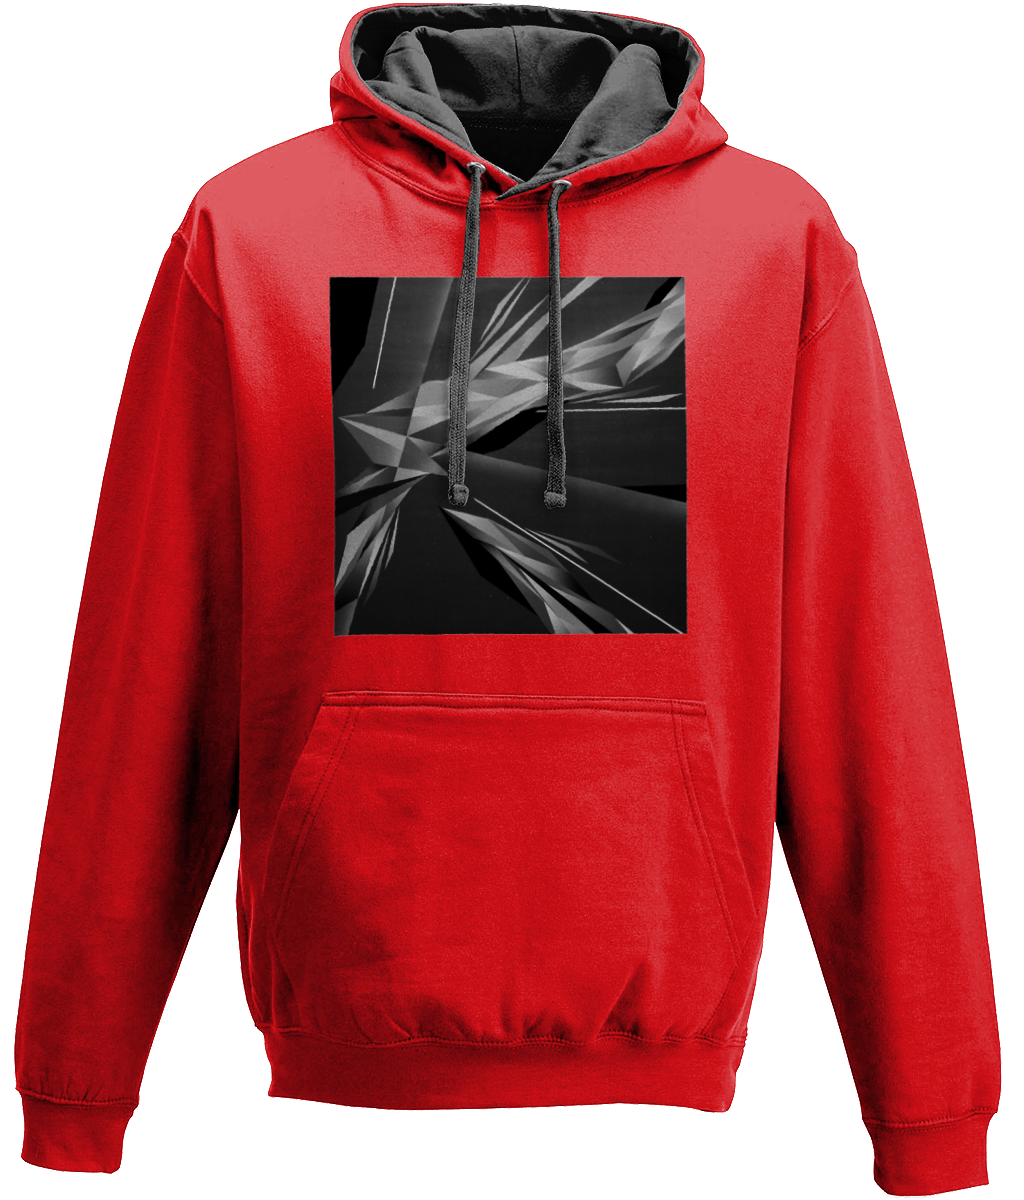 #ArtIt- urban artwear making streetwear out of contemporary art: A. Platkovsky red hoodie delivered print on demand